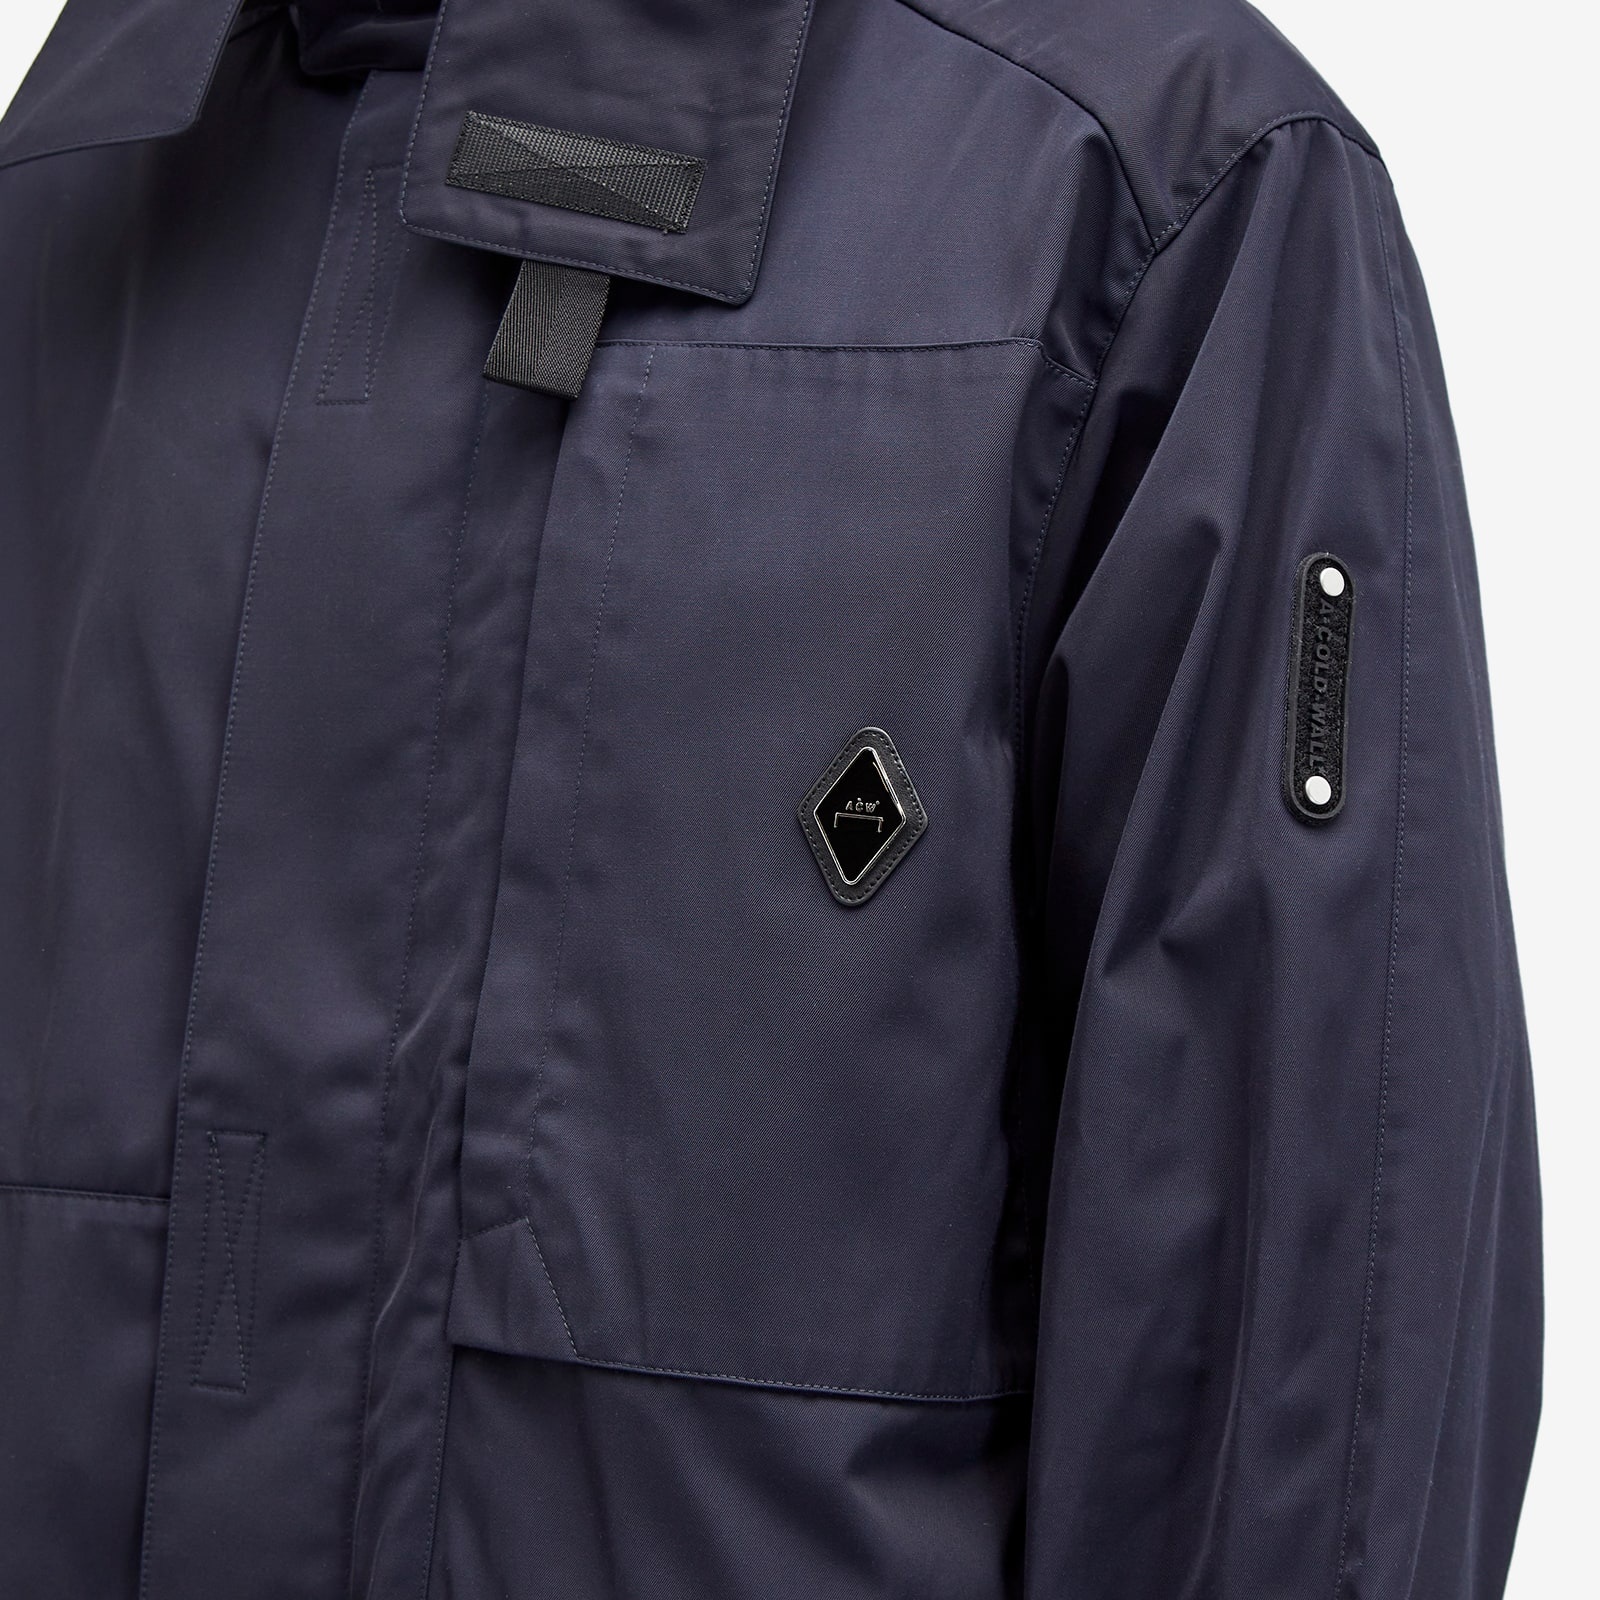 A-COLD-WALL* Gable Storm Jacket - 5